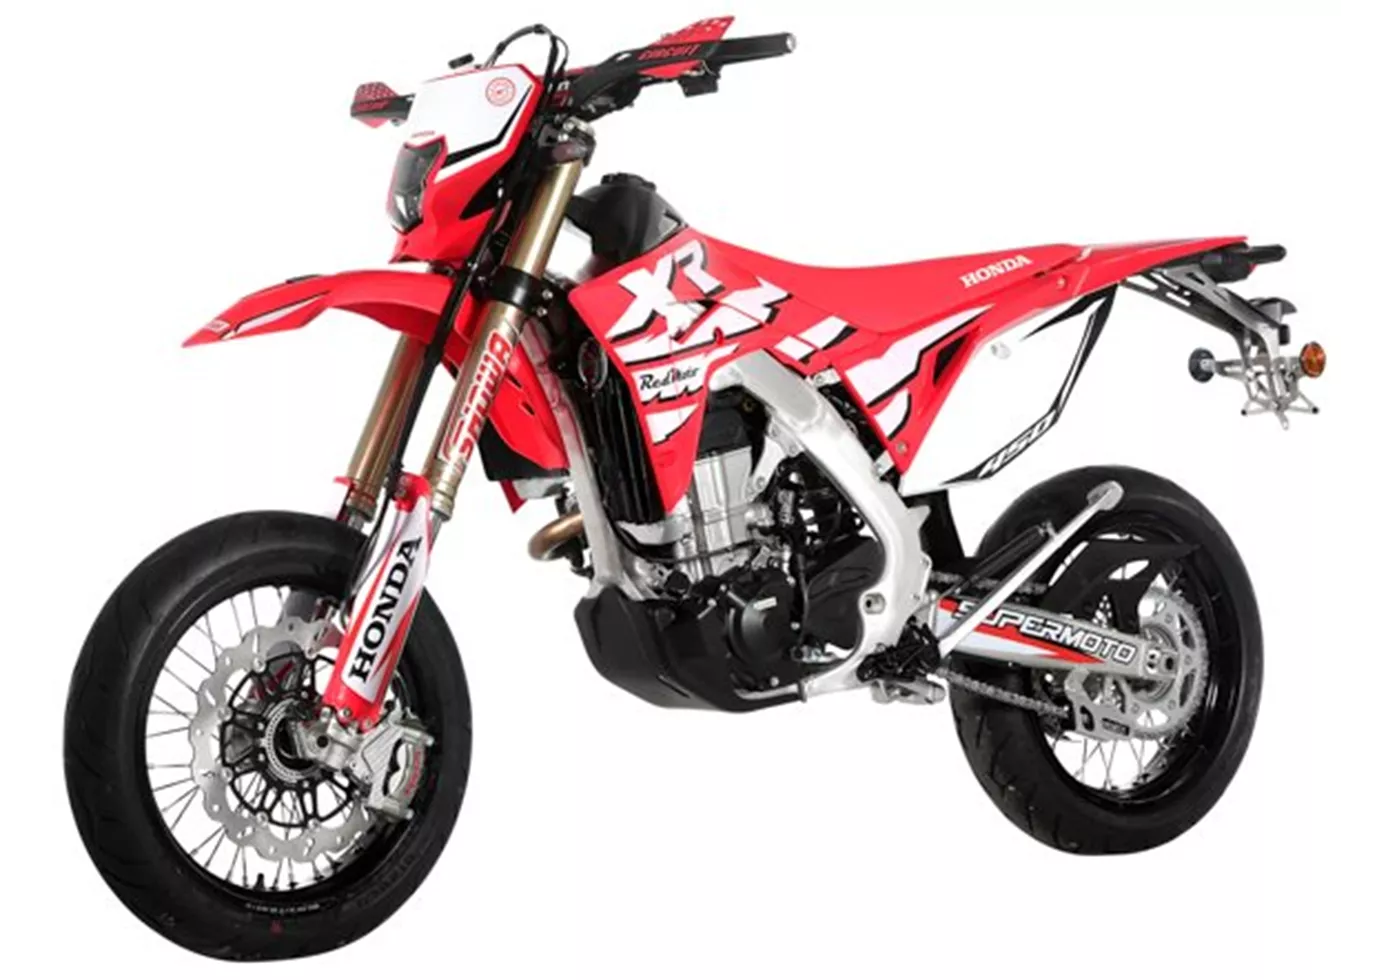 Red Moto CRF 450XR Supermoto 2020